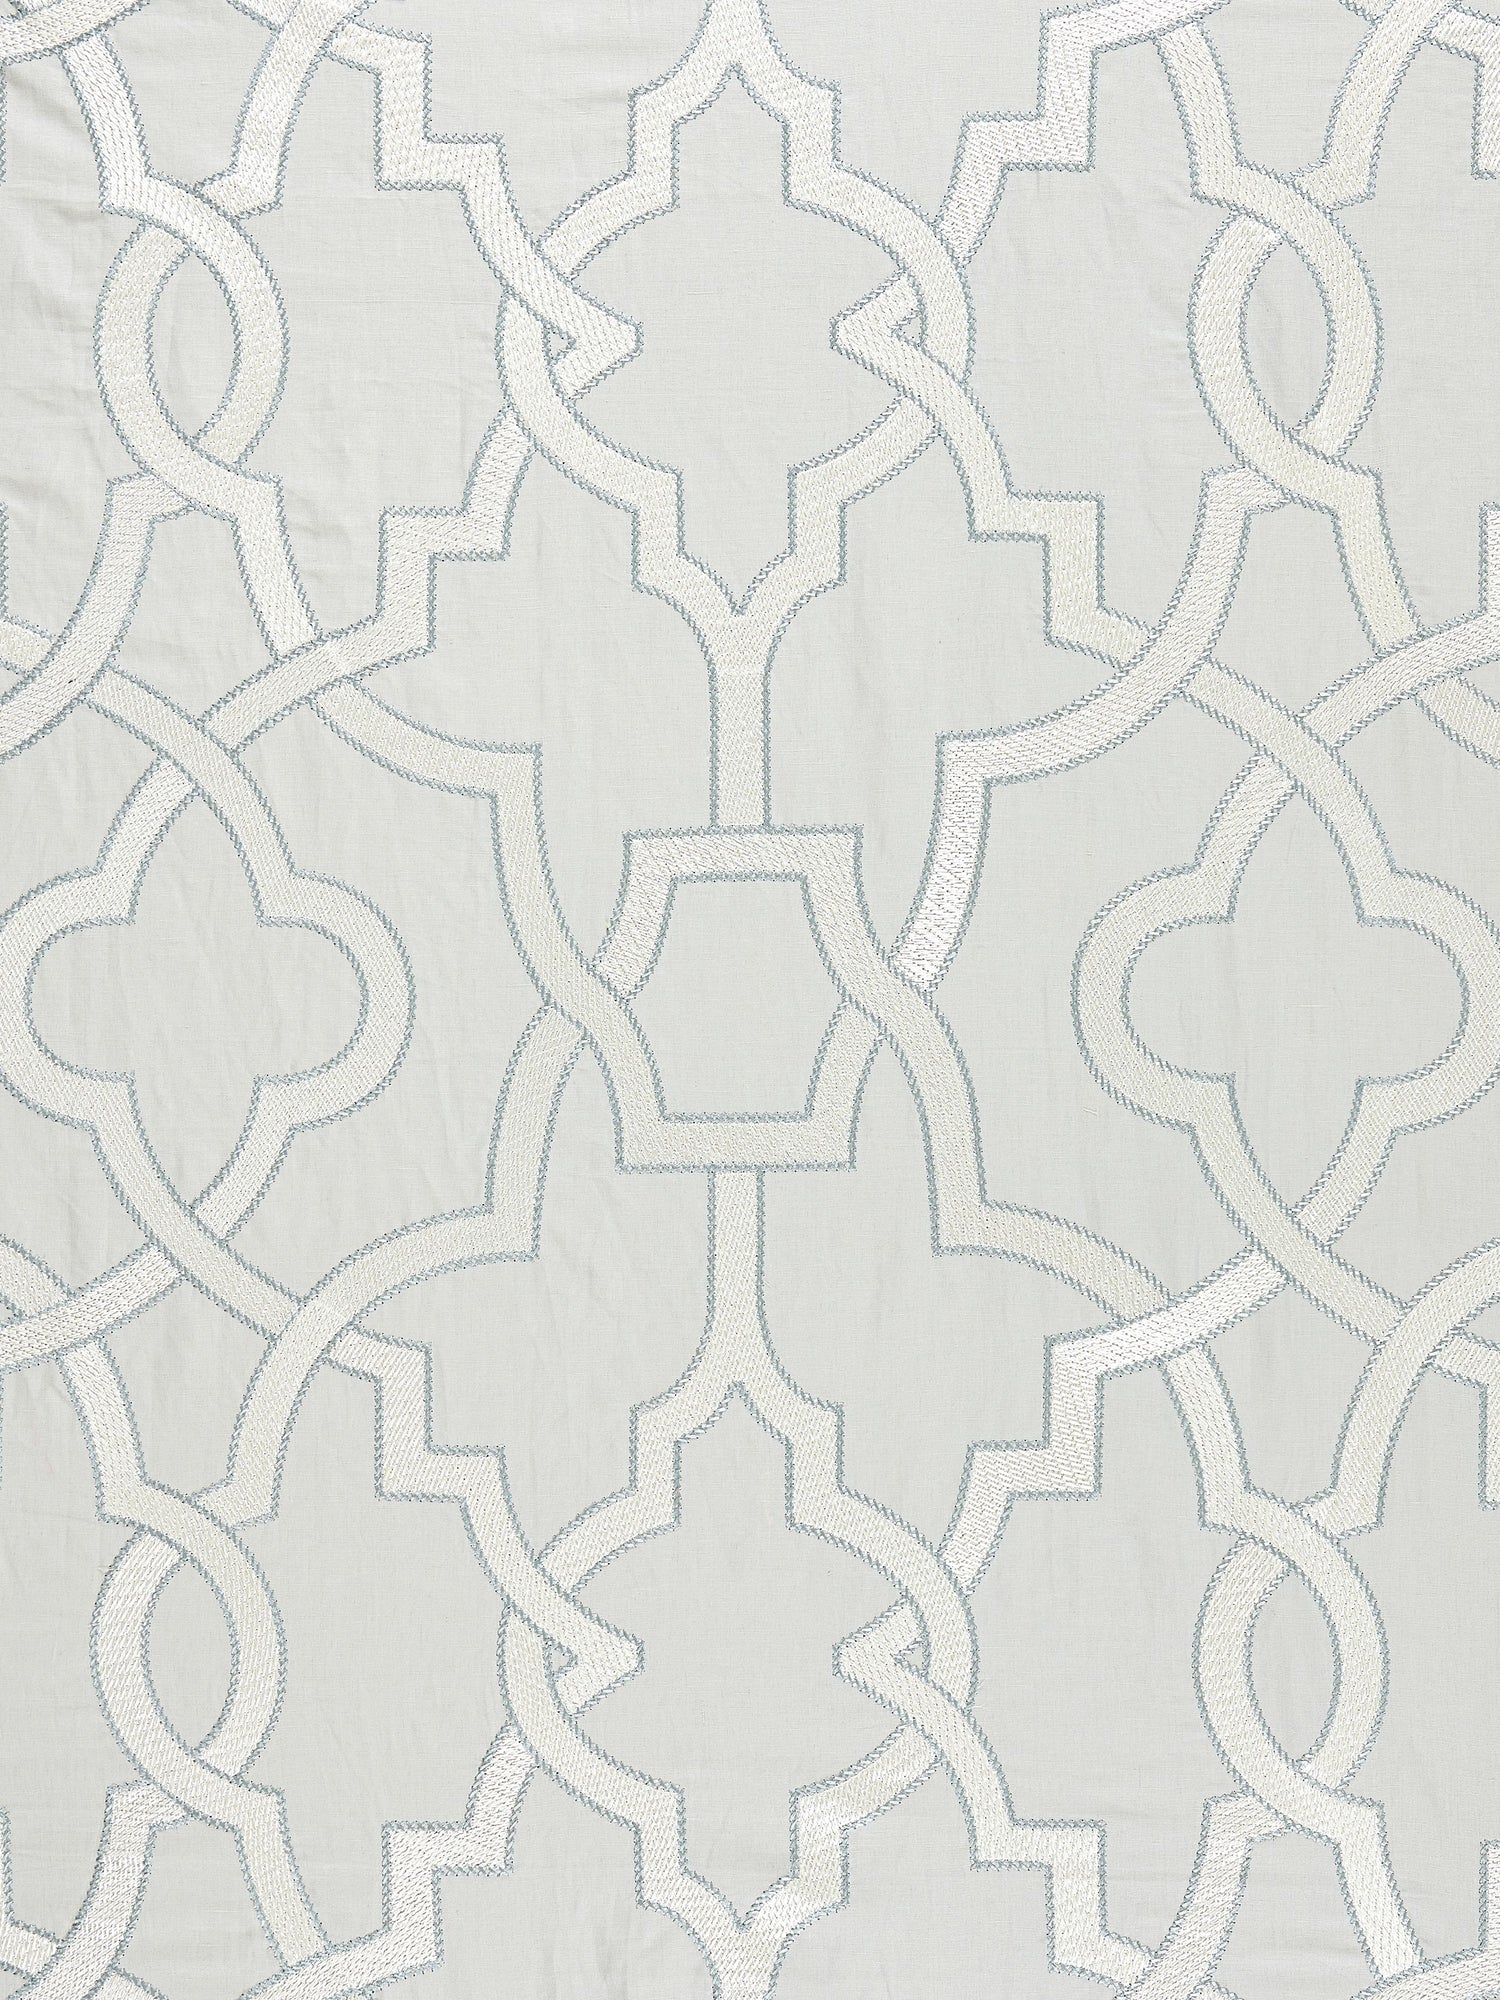 Damascus Embroidery fabric in pearl grey color - pattern number SC 000327073 - by Scalamandre in the Scalamandre Fabrics Book 1 collection